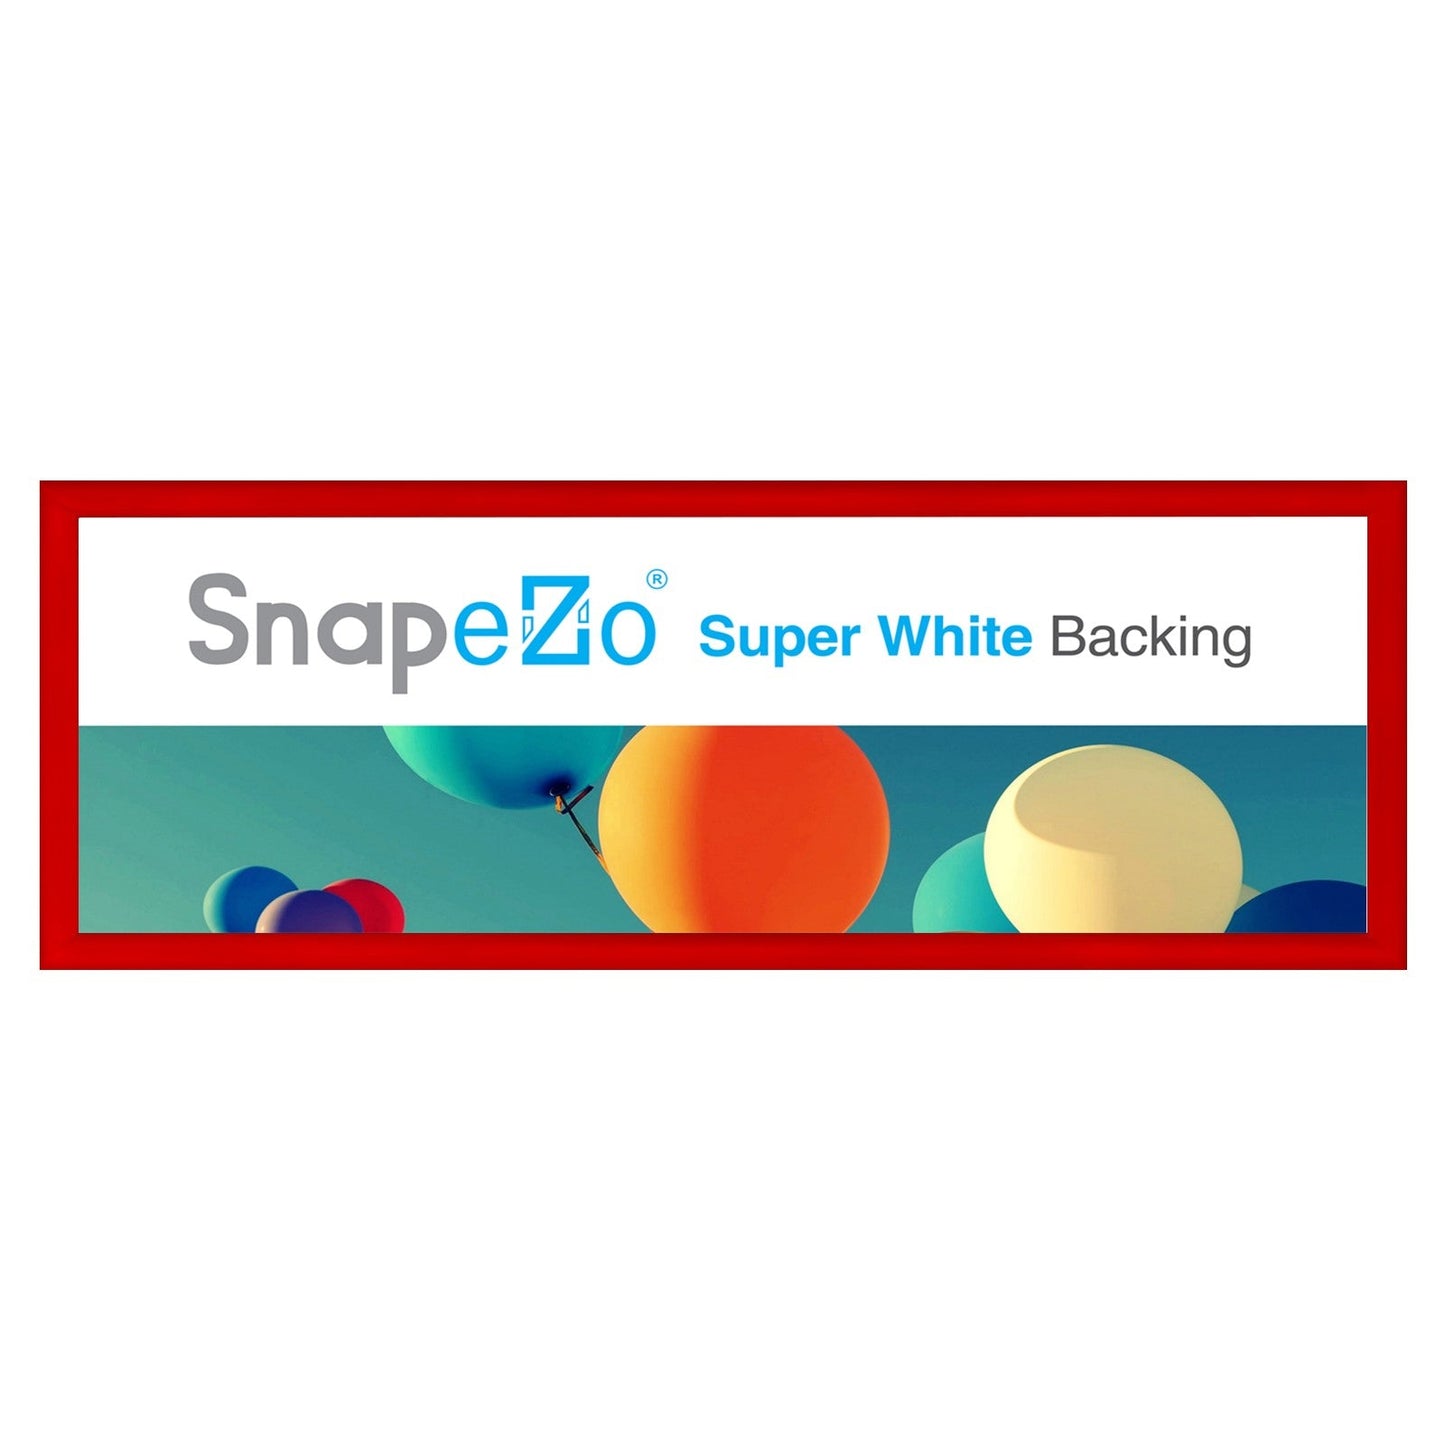 12x36 Red SnapeZo® Snap Frame - 1.2" Profile